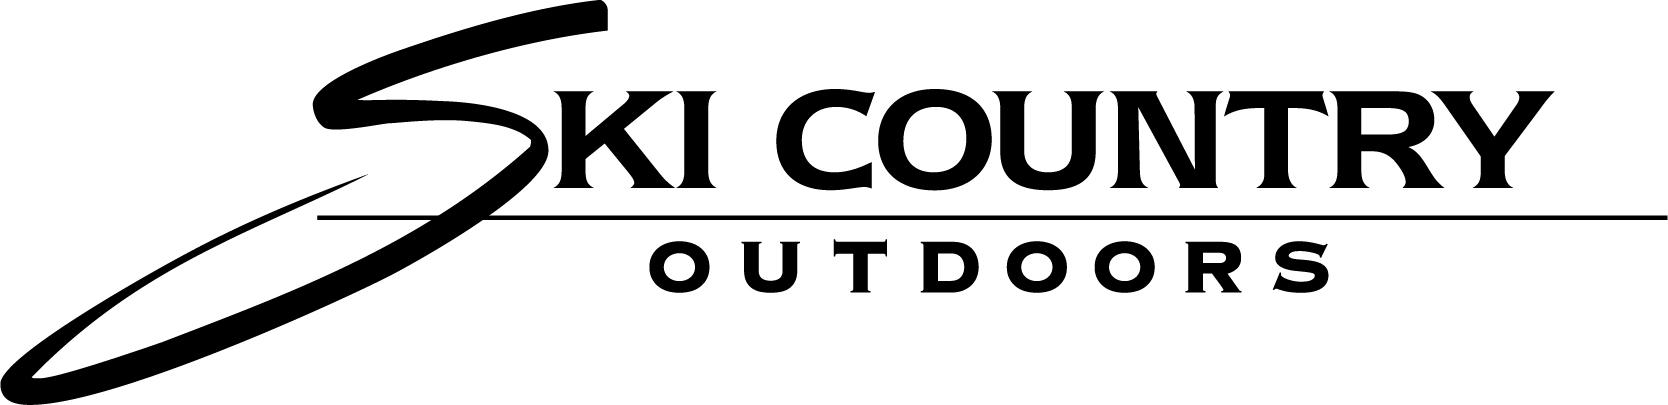 Ski Country Outdoors.